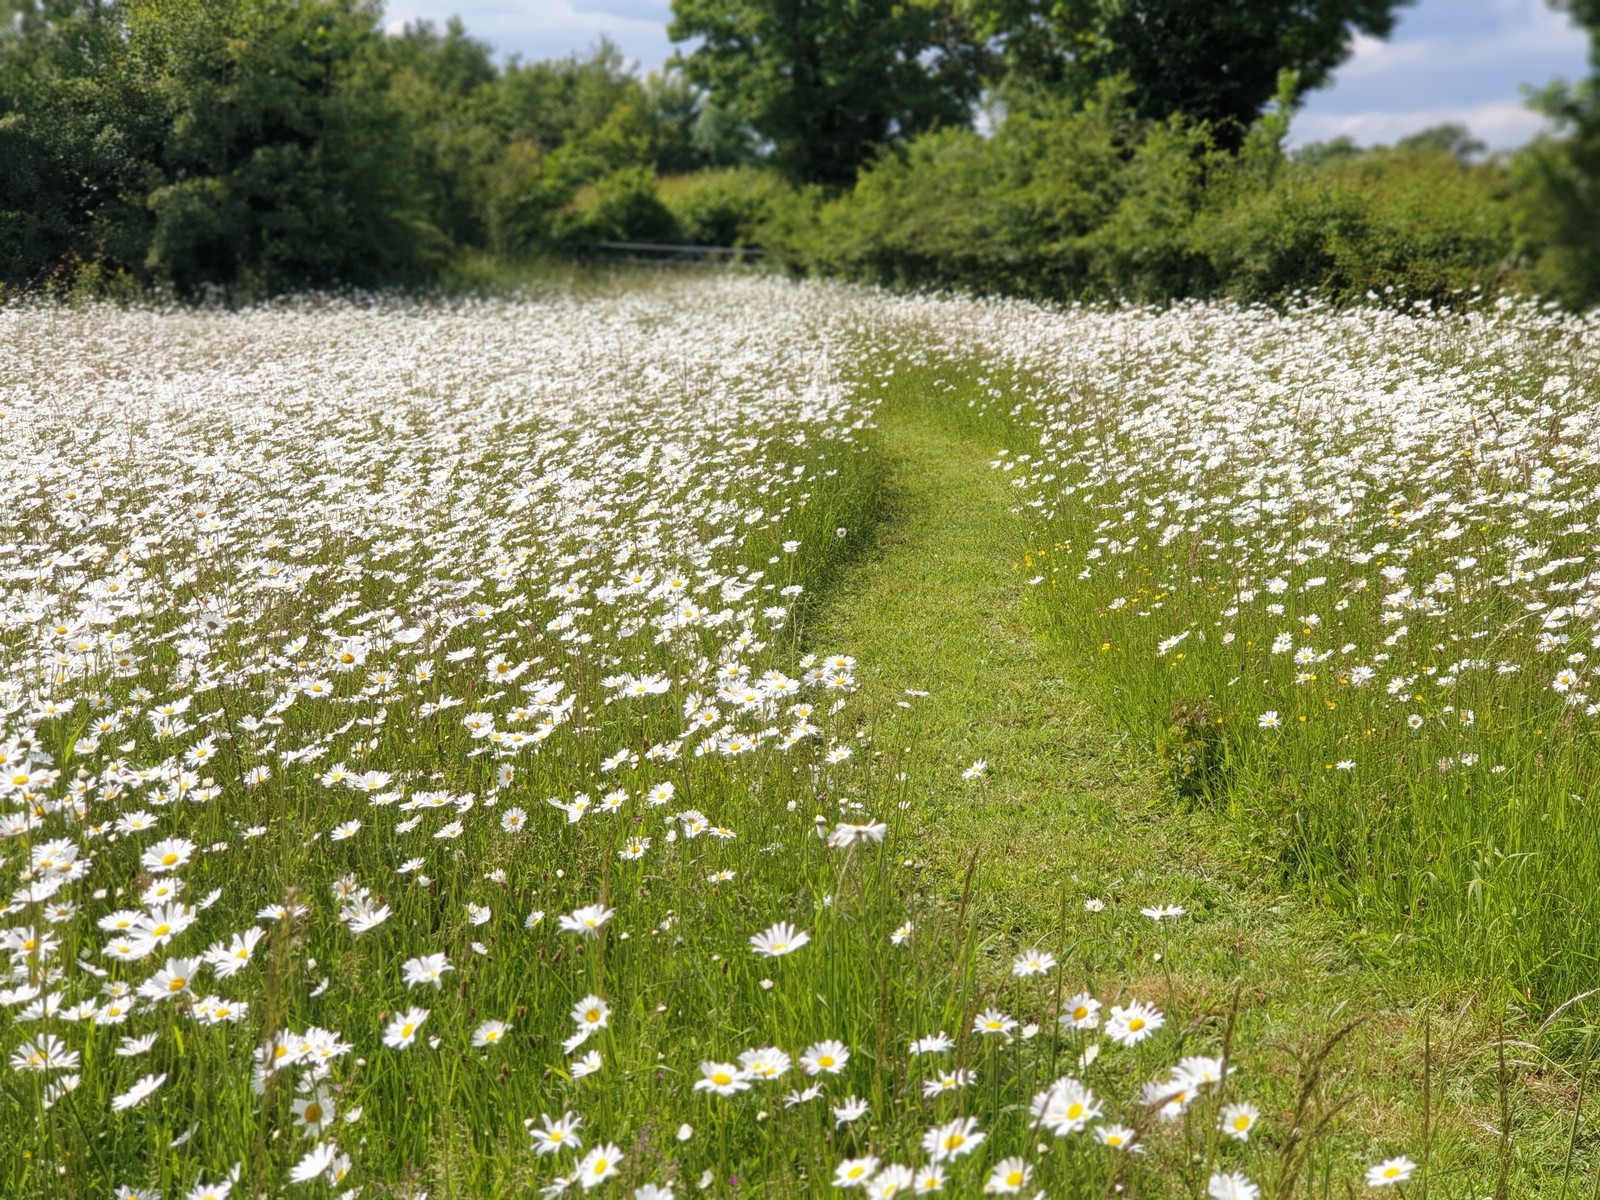 Mown path through orchard wildflower meadow